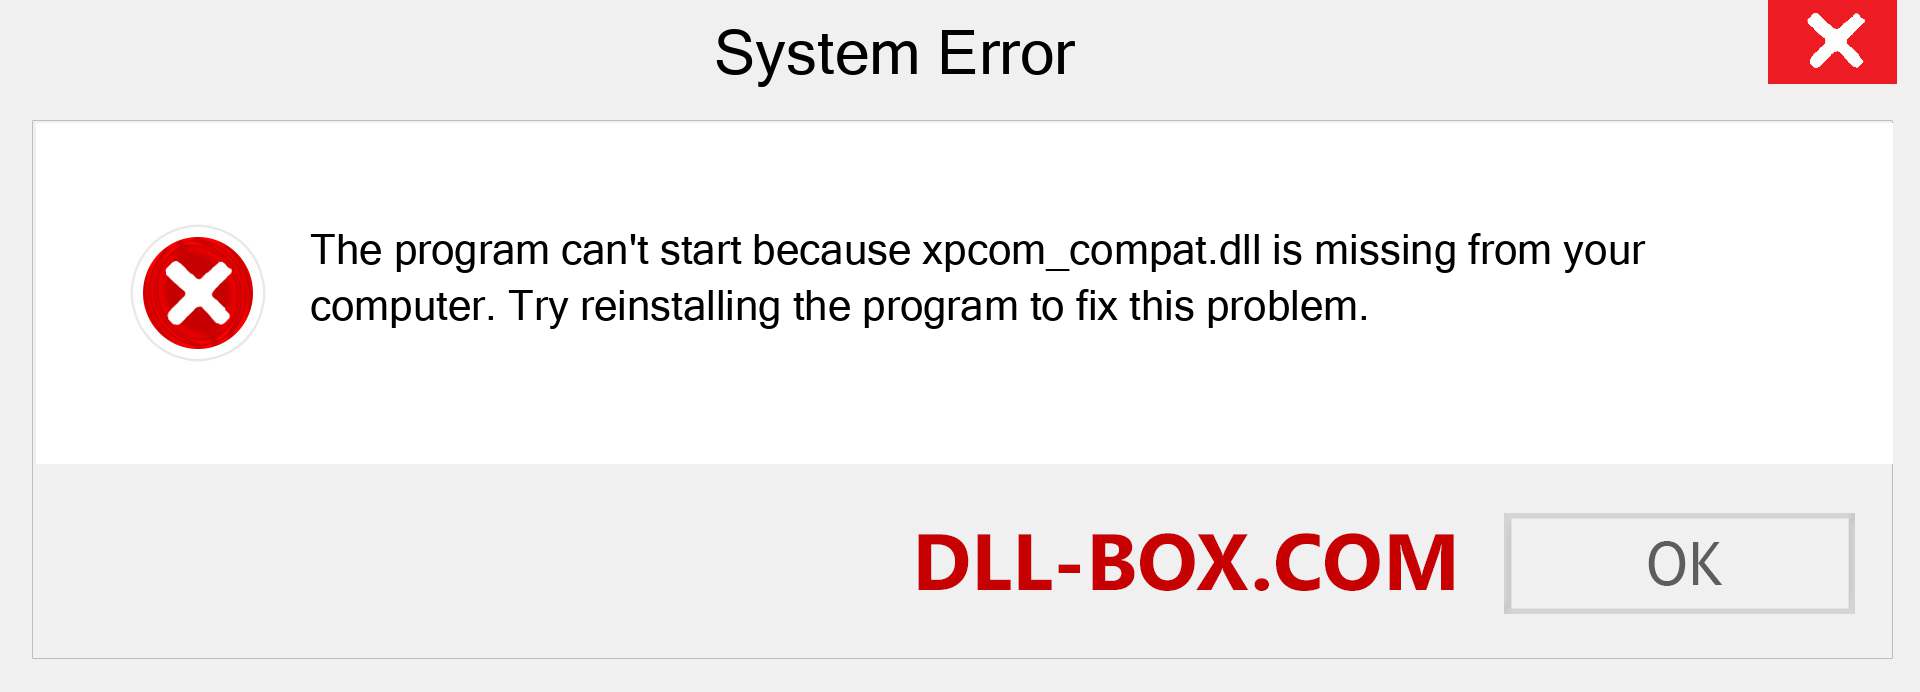  xpcom_compat.dll file is missing?. Download for Windows 7, 8, 10 - Fix  xpcom_compat dll Missing Error on Windows, photos, images